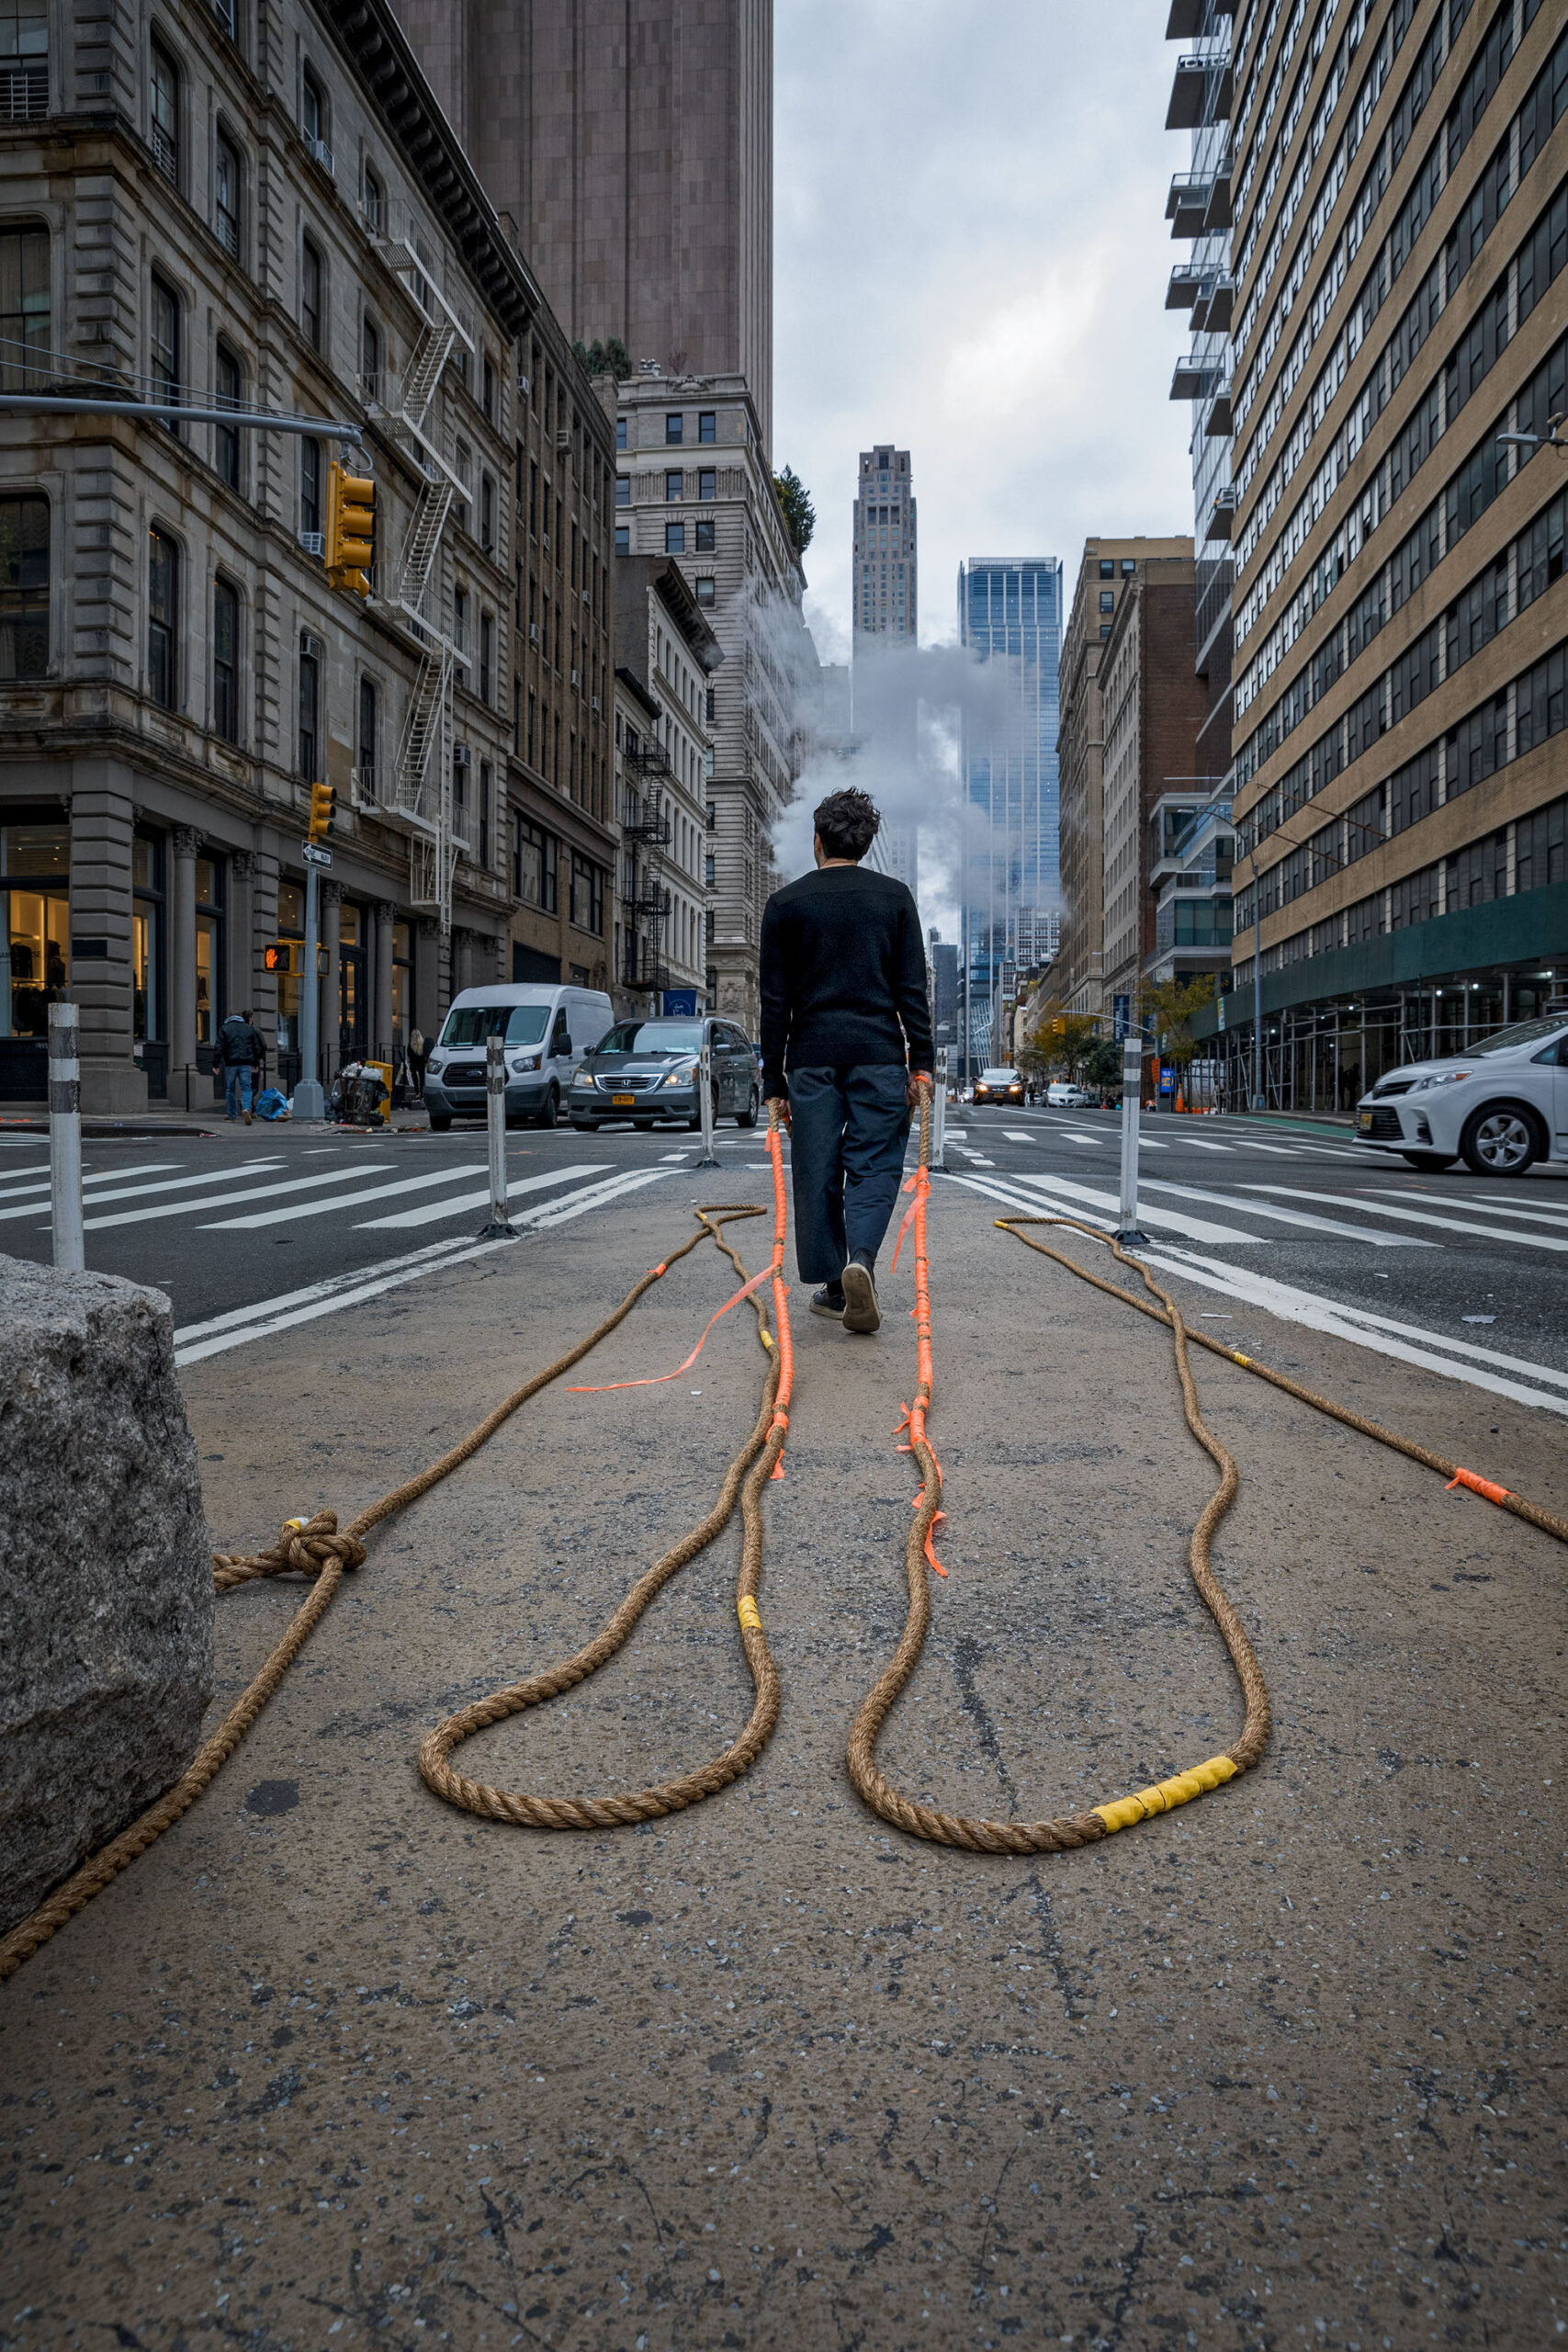 Performer walking slowly with rope into triangle to begin the work